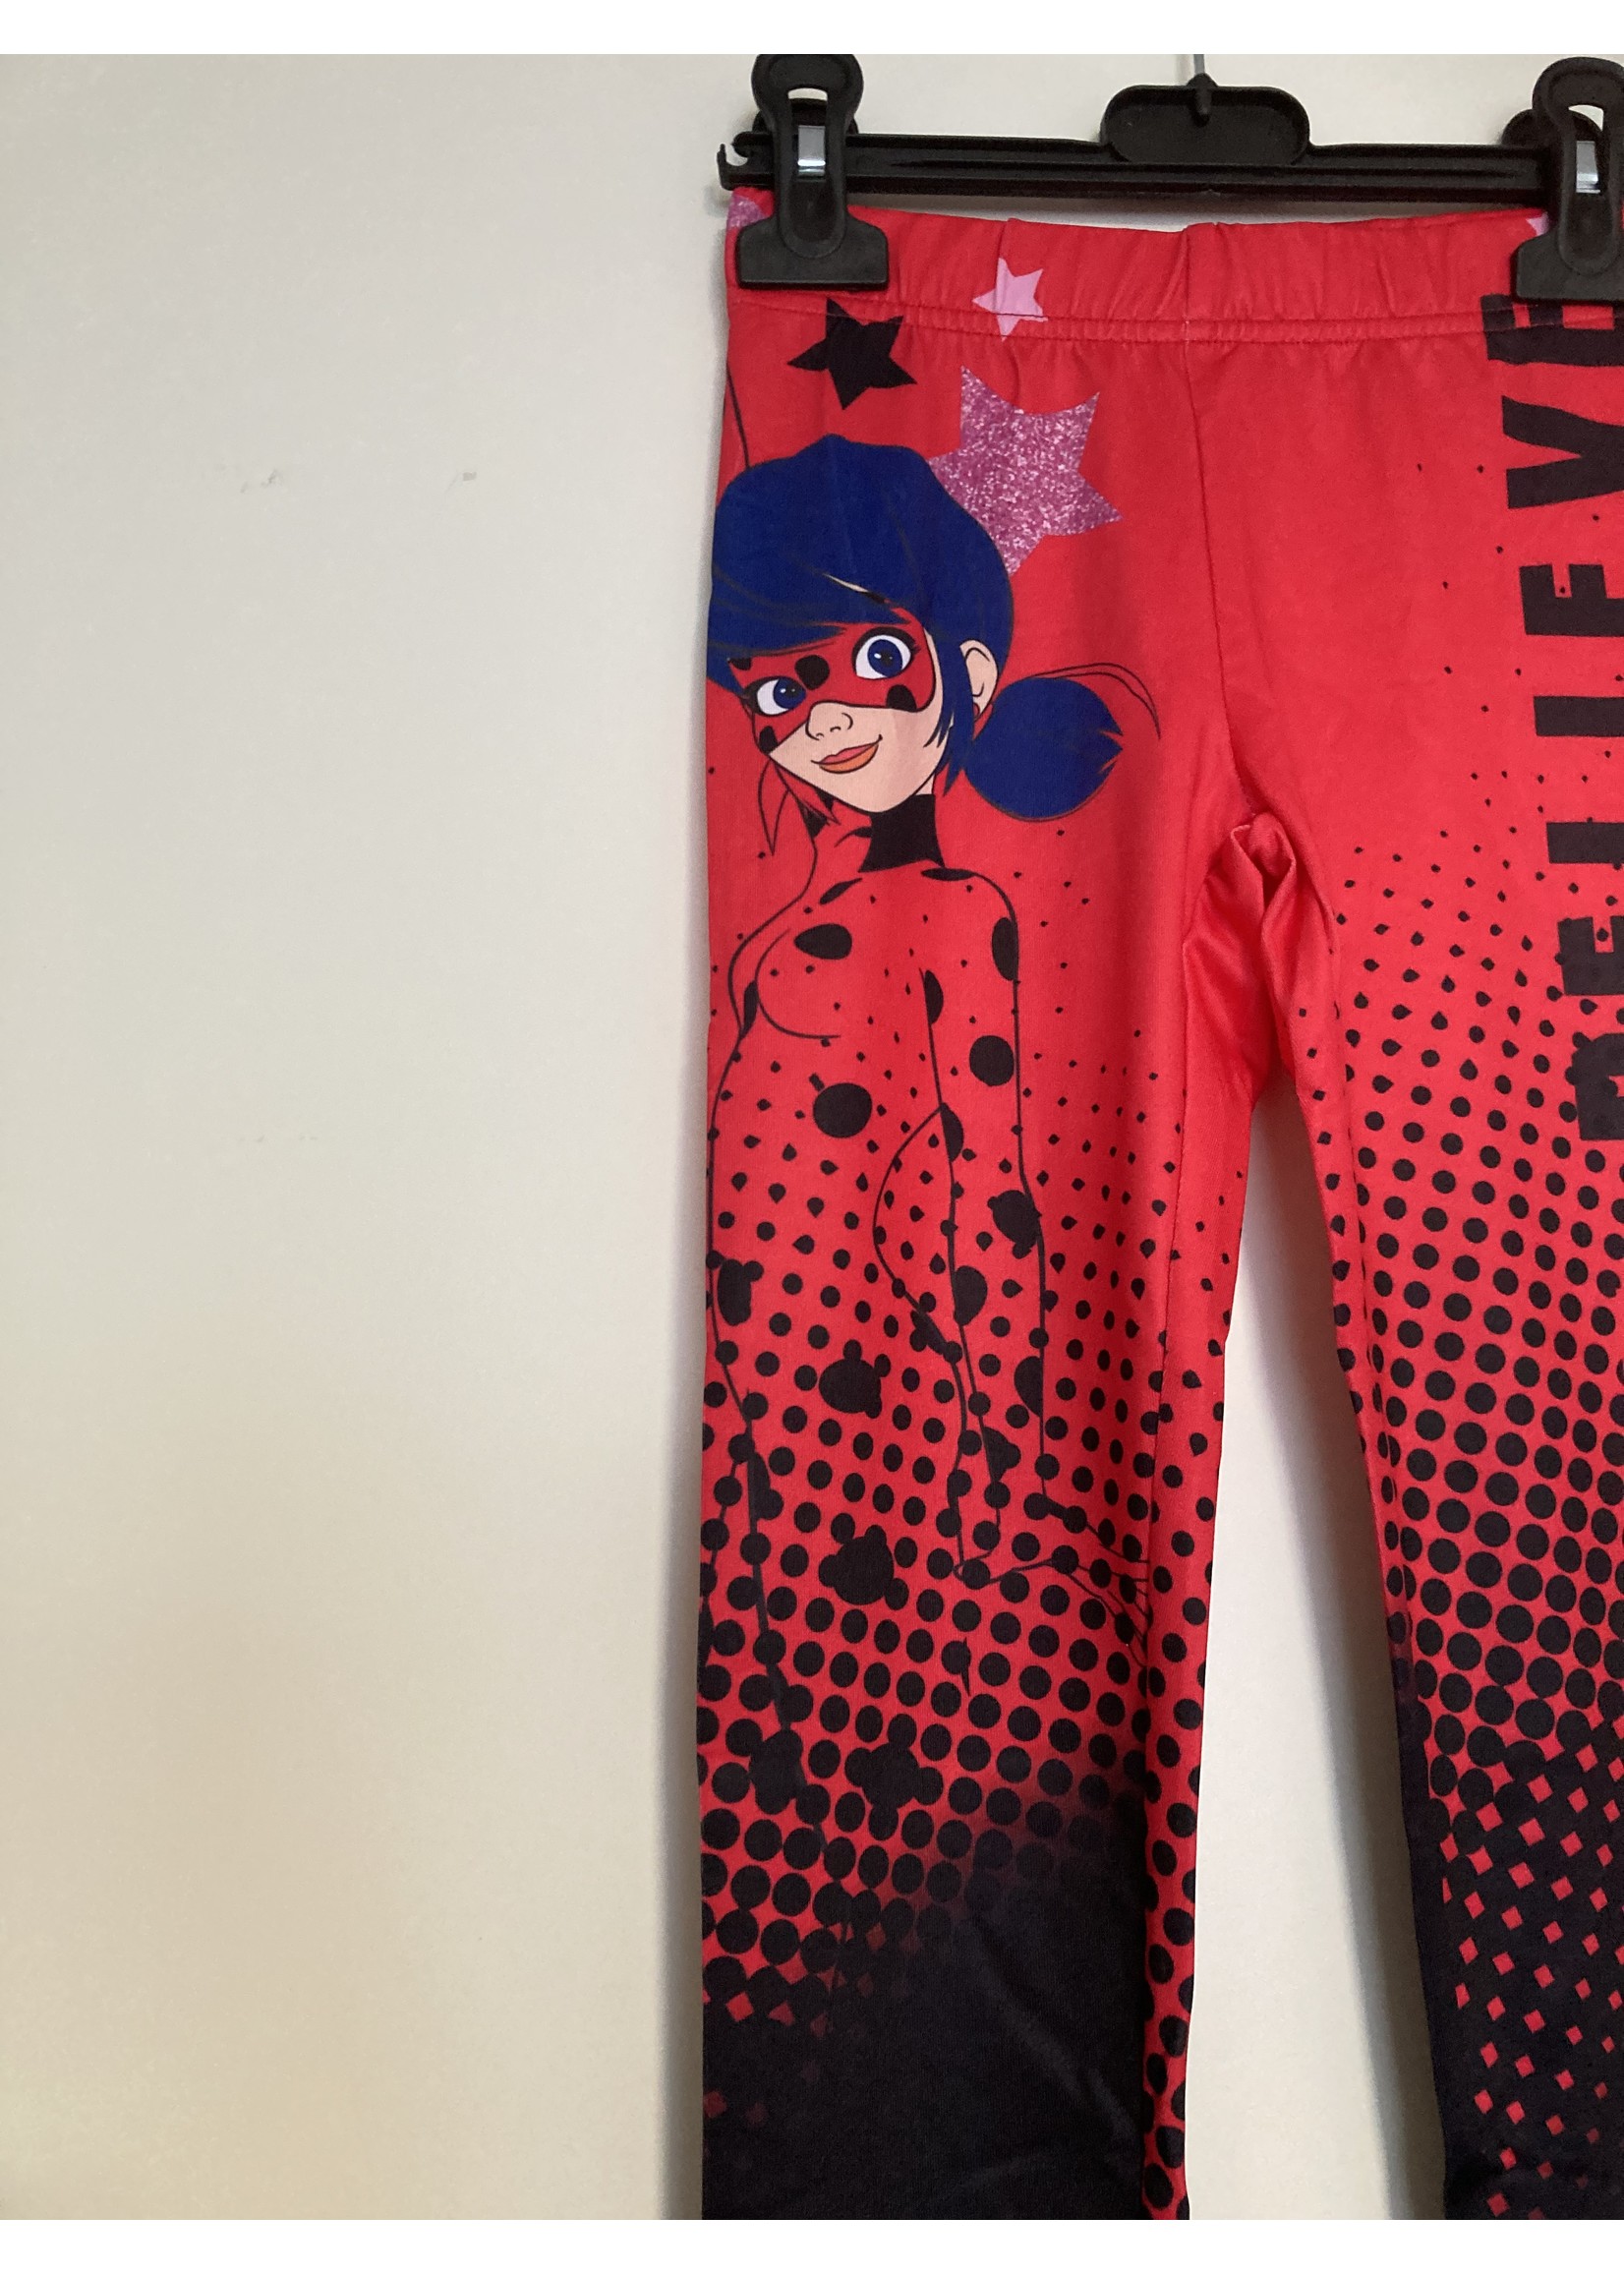 Miraculous Ladybug leggings from Miraculous red